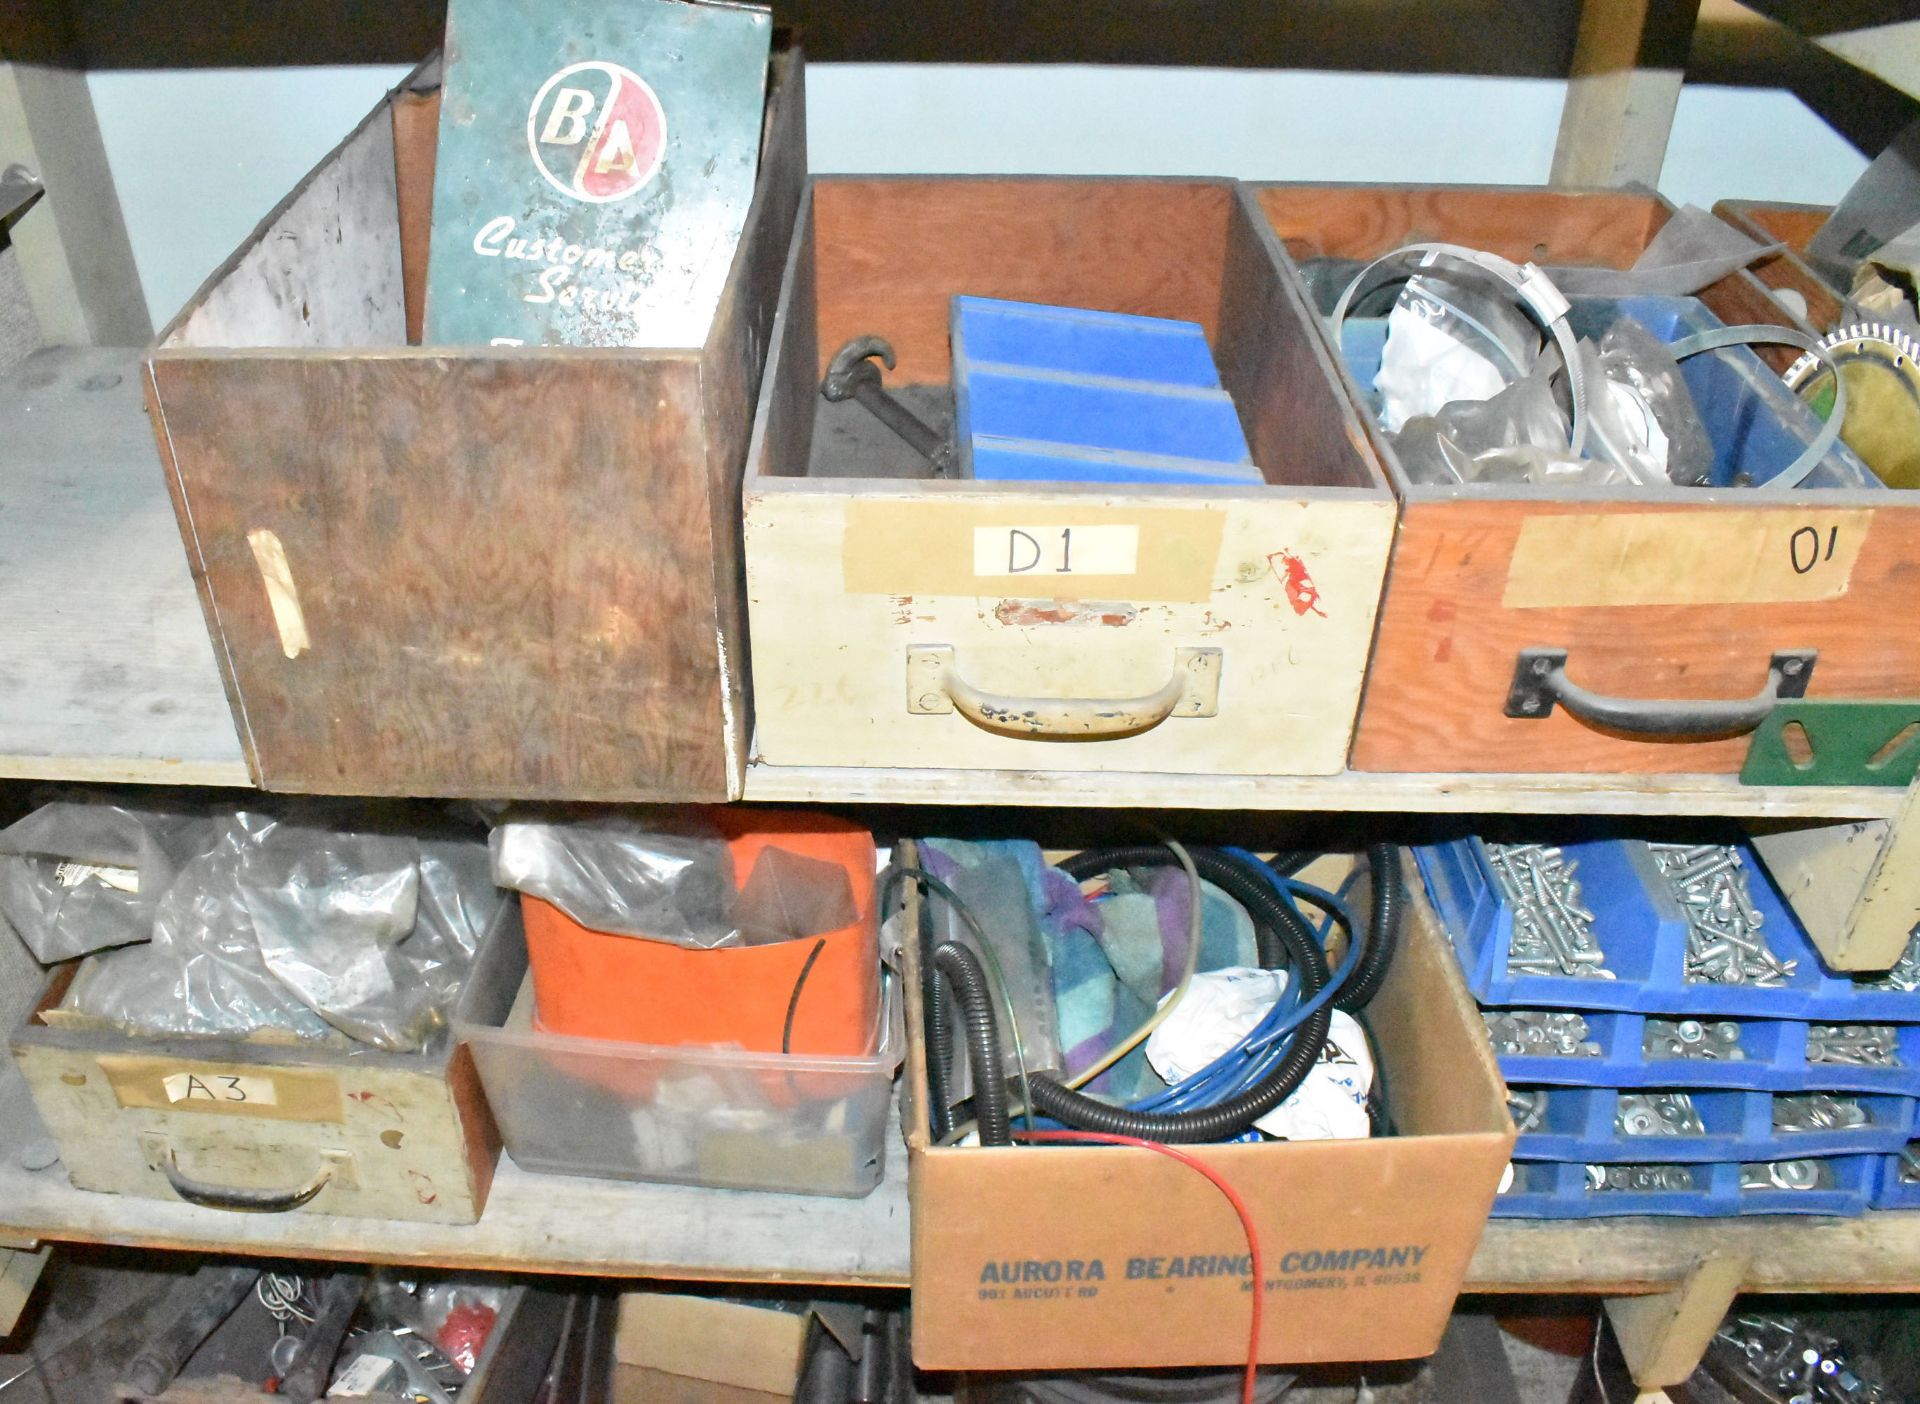 LOT/ SHELVES WITH CONTENTS - INCLUDING SPARE PARTS, SHOP SUPPLIES & HARDWARE - Image 7 of 10